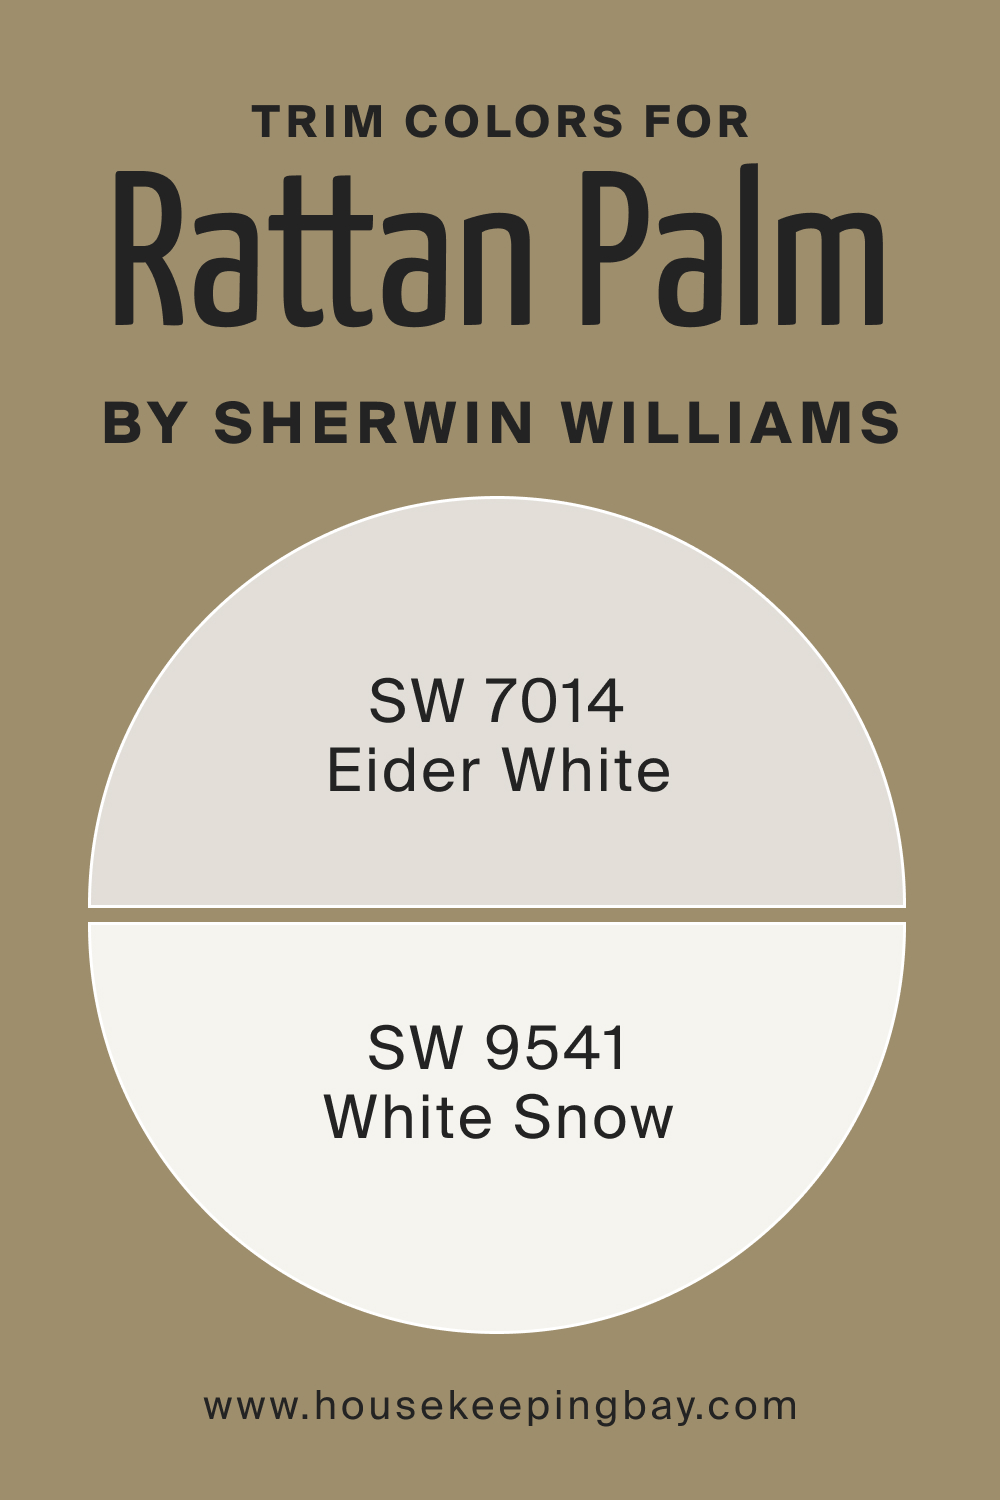 Trim Colors of SW 9533 Rattan Palm by Sherwin Williams